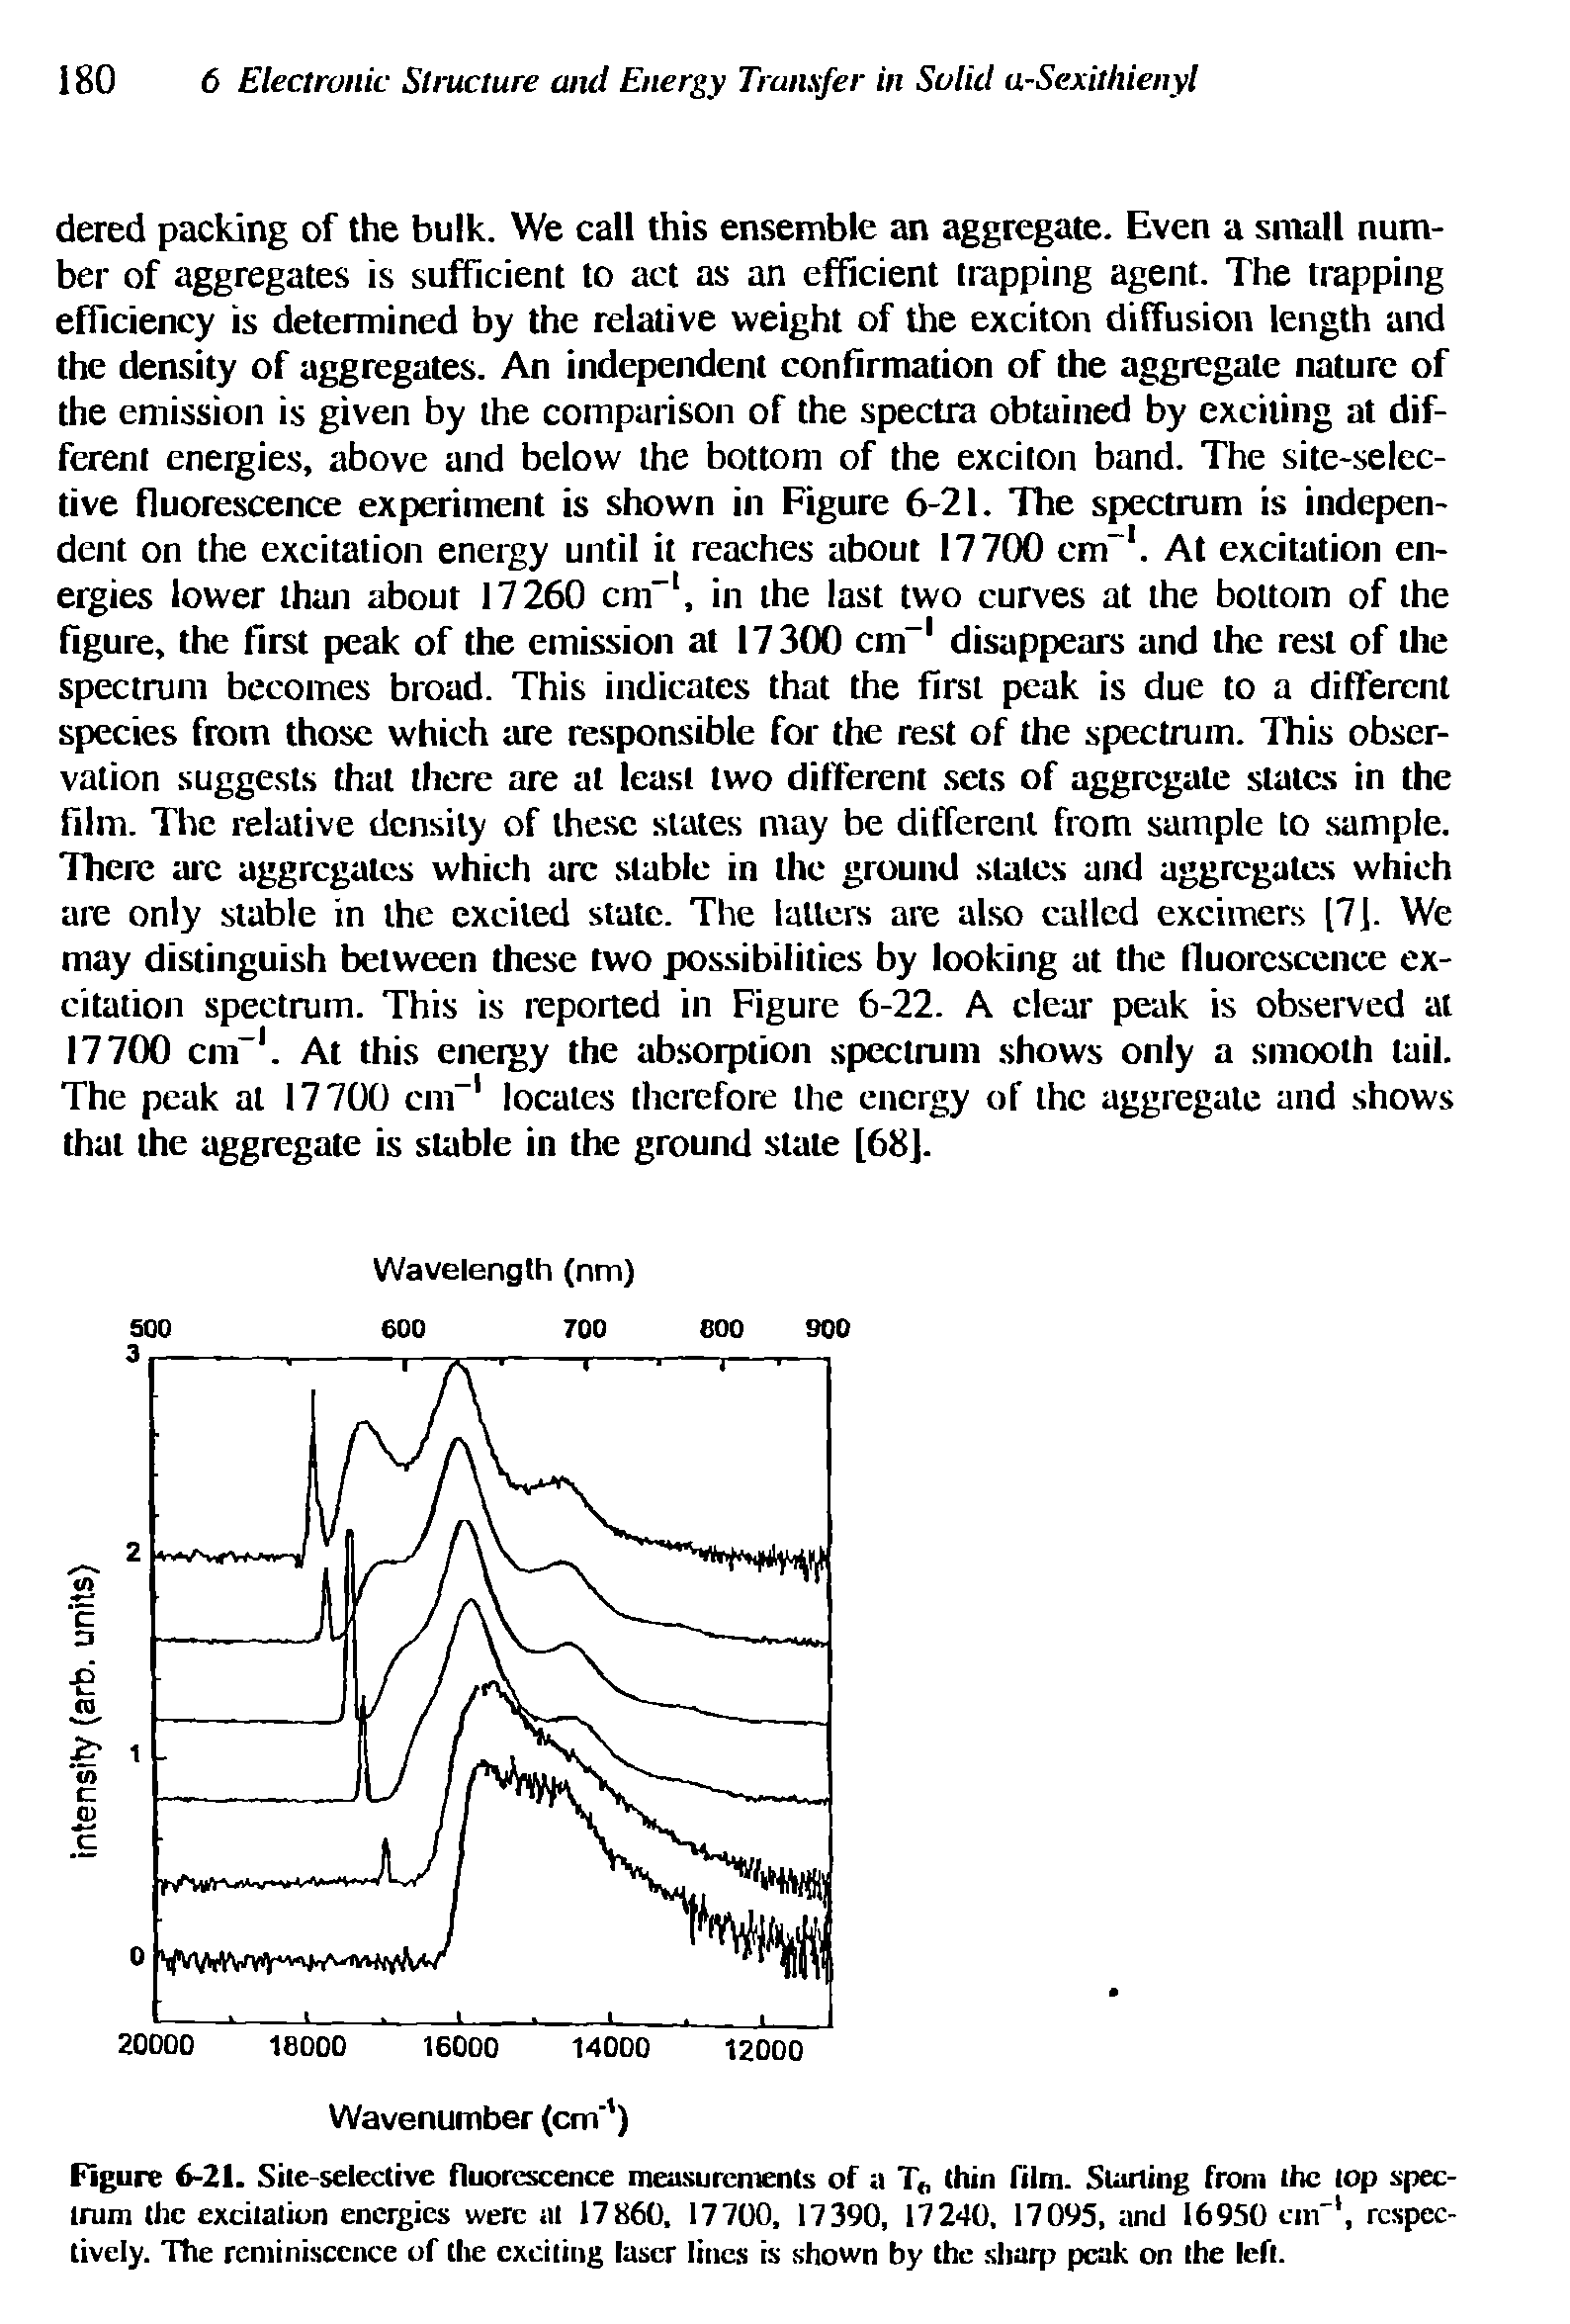 Figure 6-21. Site-selective fluorescence measurements of a T thin film. Starting from the top spectrum the excitation energies were at 17860. 17700, 17390, 17240, 17095, and 16950 cur, respectively. The reminiscence of the exciting laser lines is shown by the sharp peak on the left.